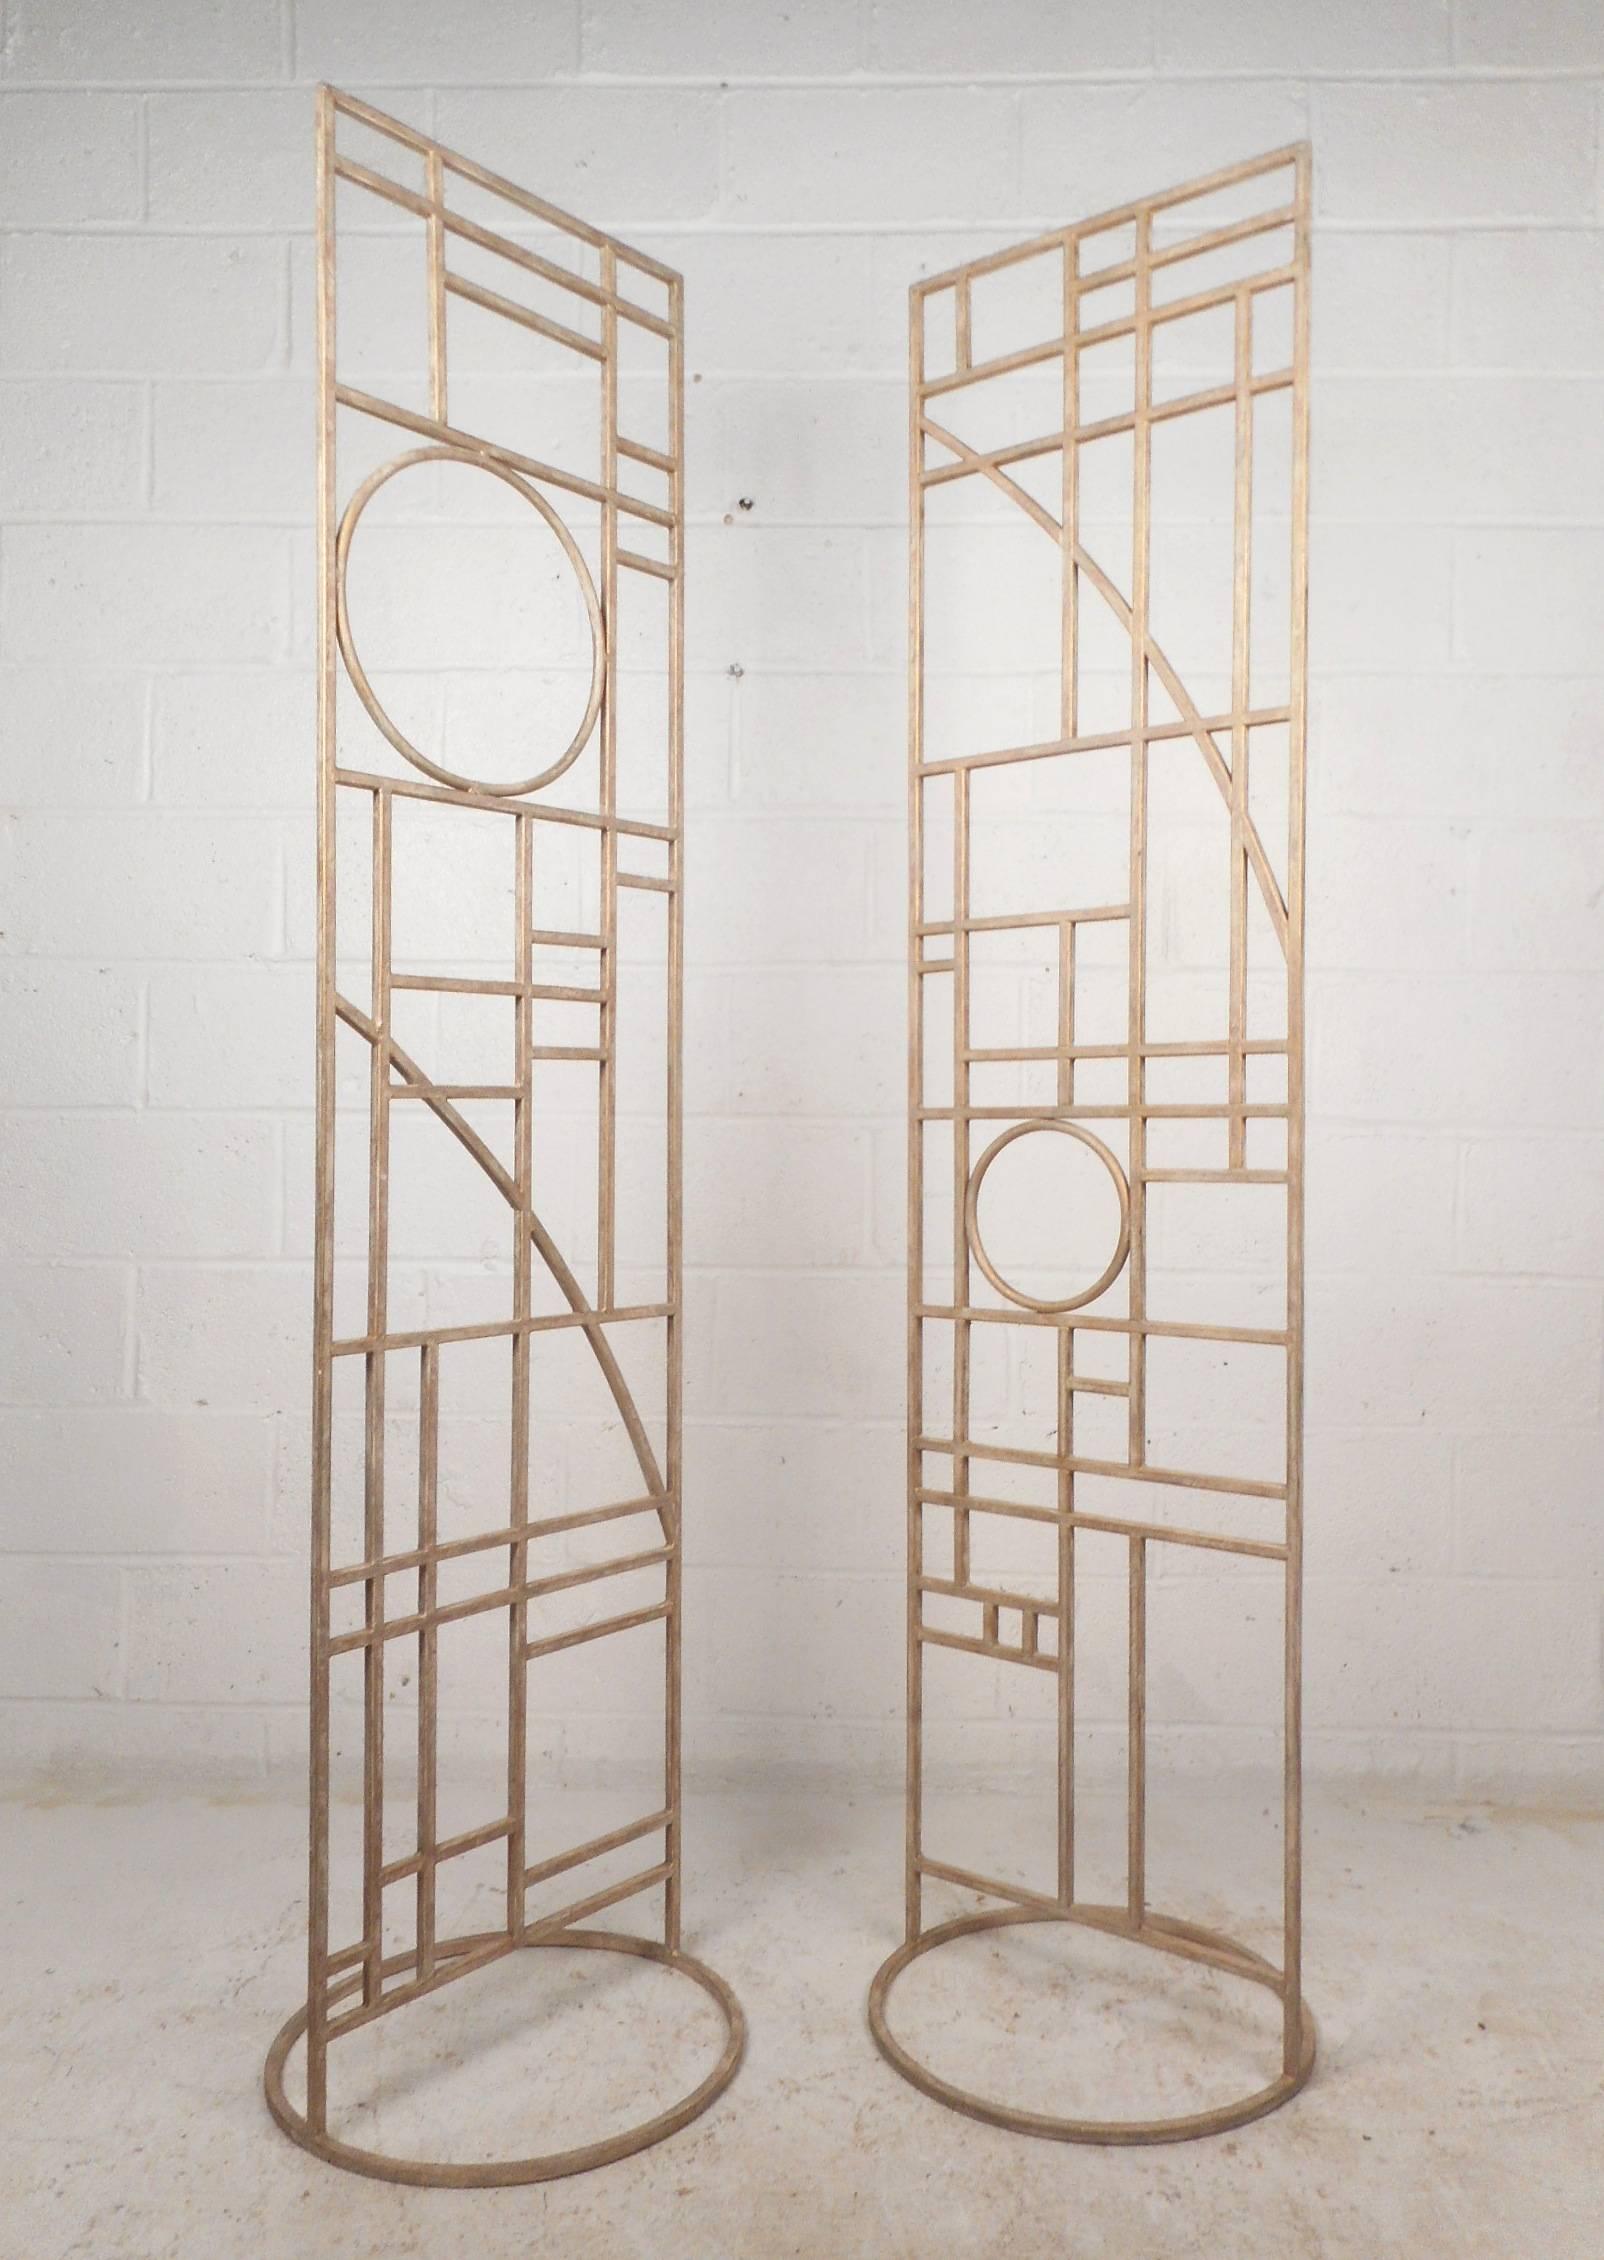 Beautiful pair of vintage modern room dividers made of metal with a sleek gold brushed finish. Elegant rectangular design with numerous geometric shapes on top of a sturdy circular base. Versatile pieces work perfectly as a screen for dividing areas